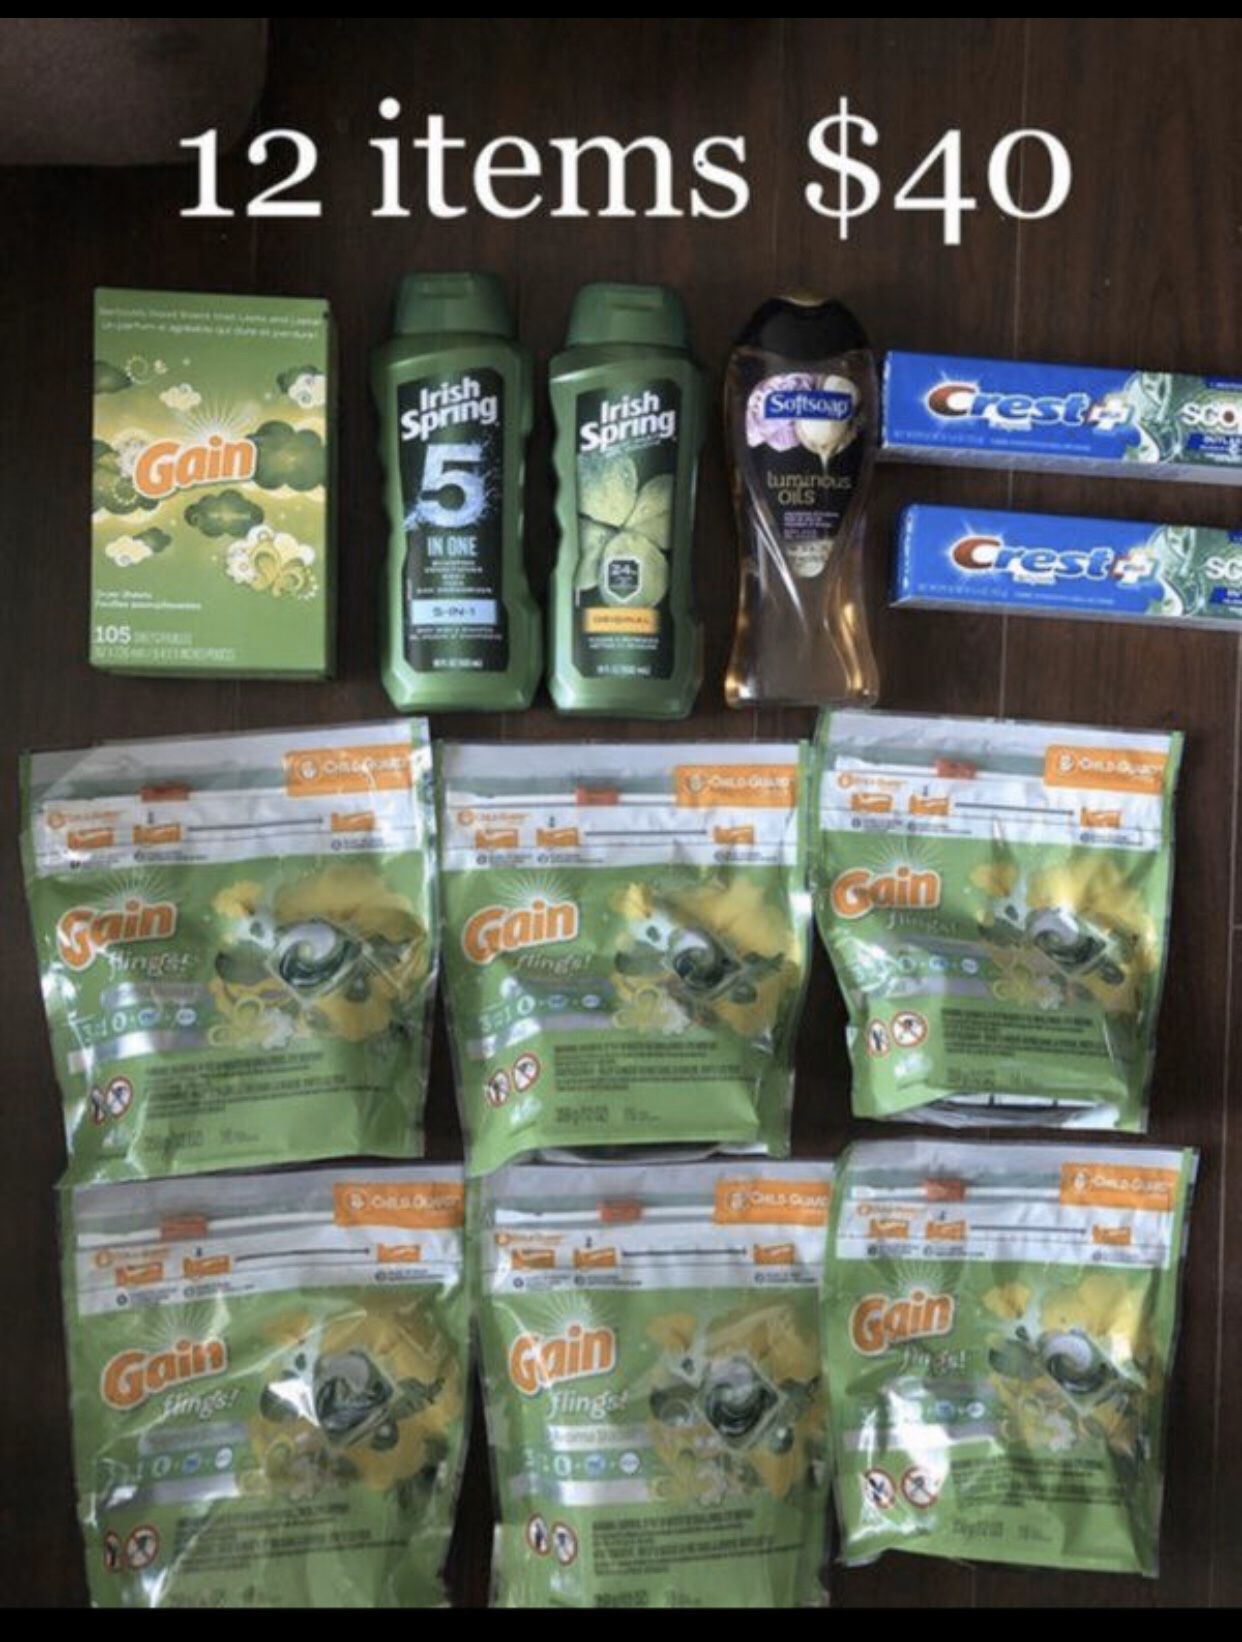 96 Gain Flings (16x6), 1 Gain Dryer Sheets; 2 Irish Spring & 1 Softsoap Body Wash; 2 Toothpastes: 12 items $40